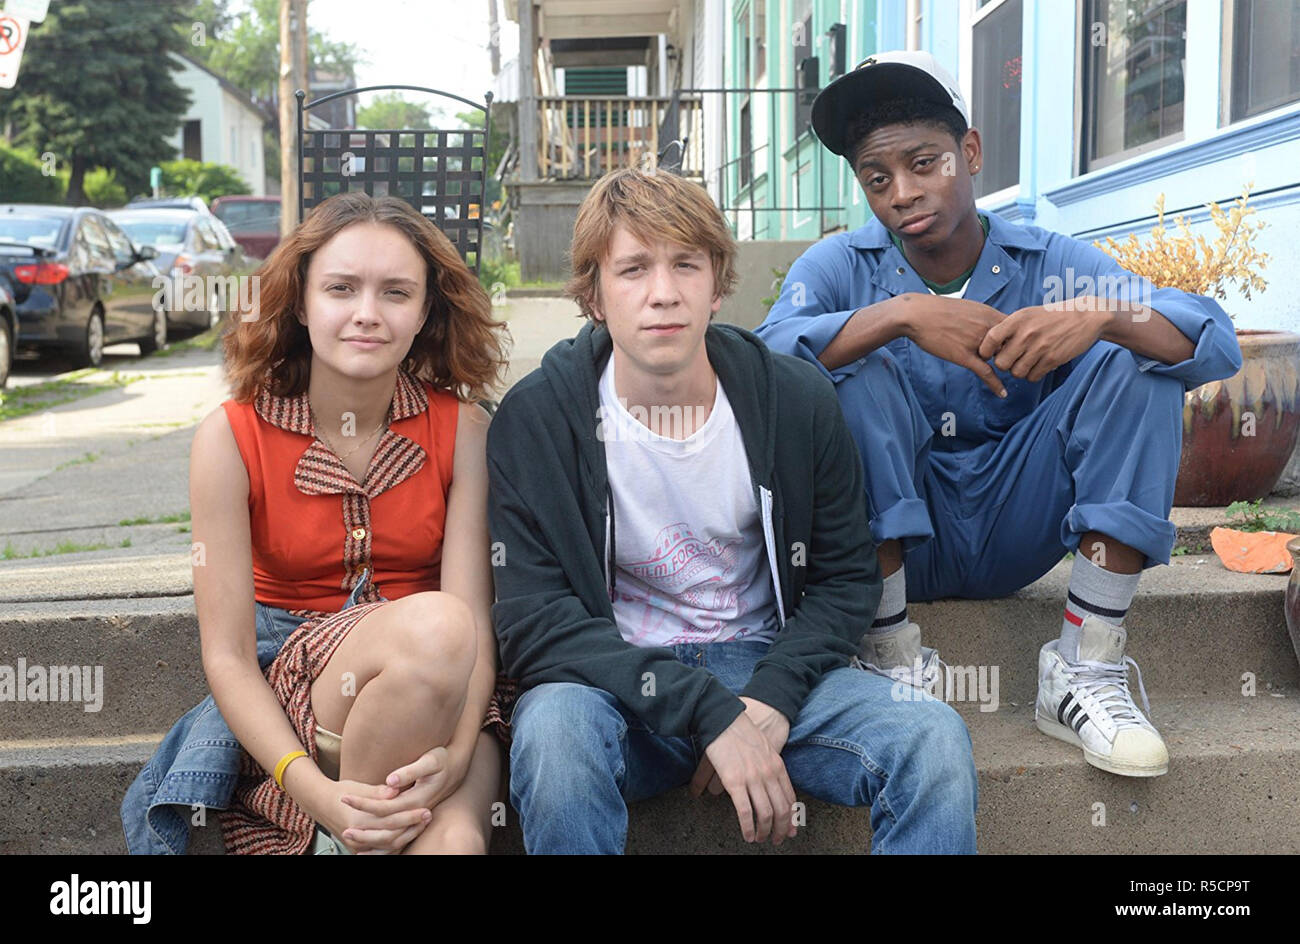 ME AND EARL AND THE DYING GIRL 2015 Indian Paintbrush film with from left: Olivia Cooke, Thomas Mann, RJ Cyler Stock Photo